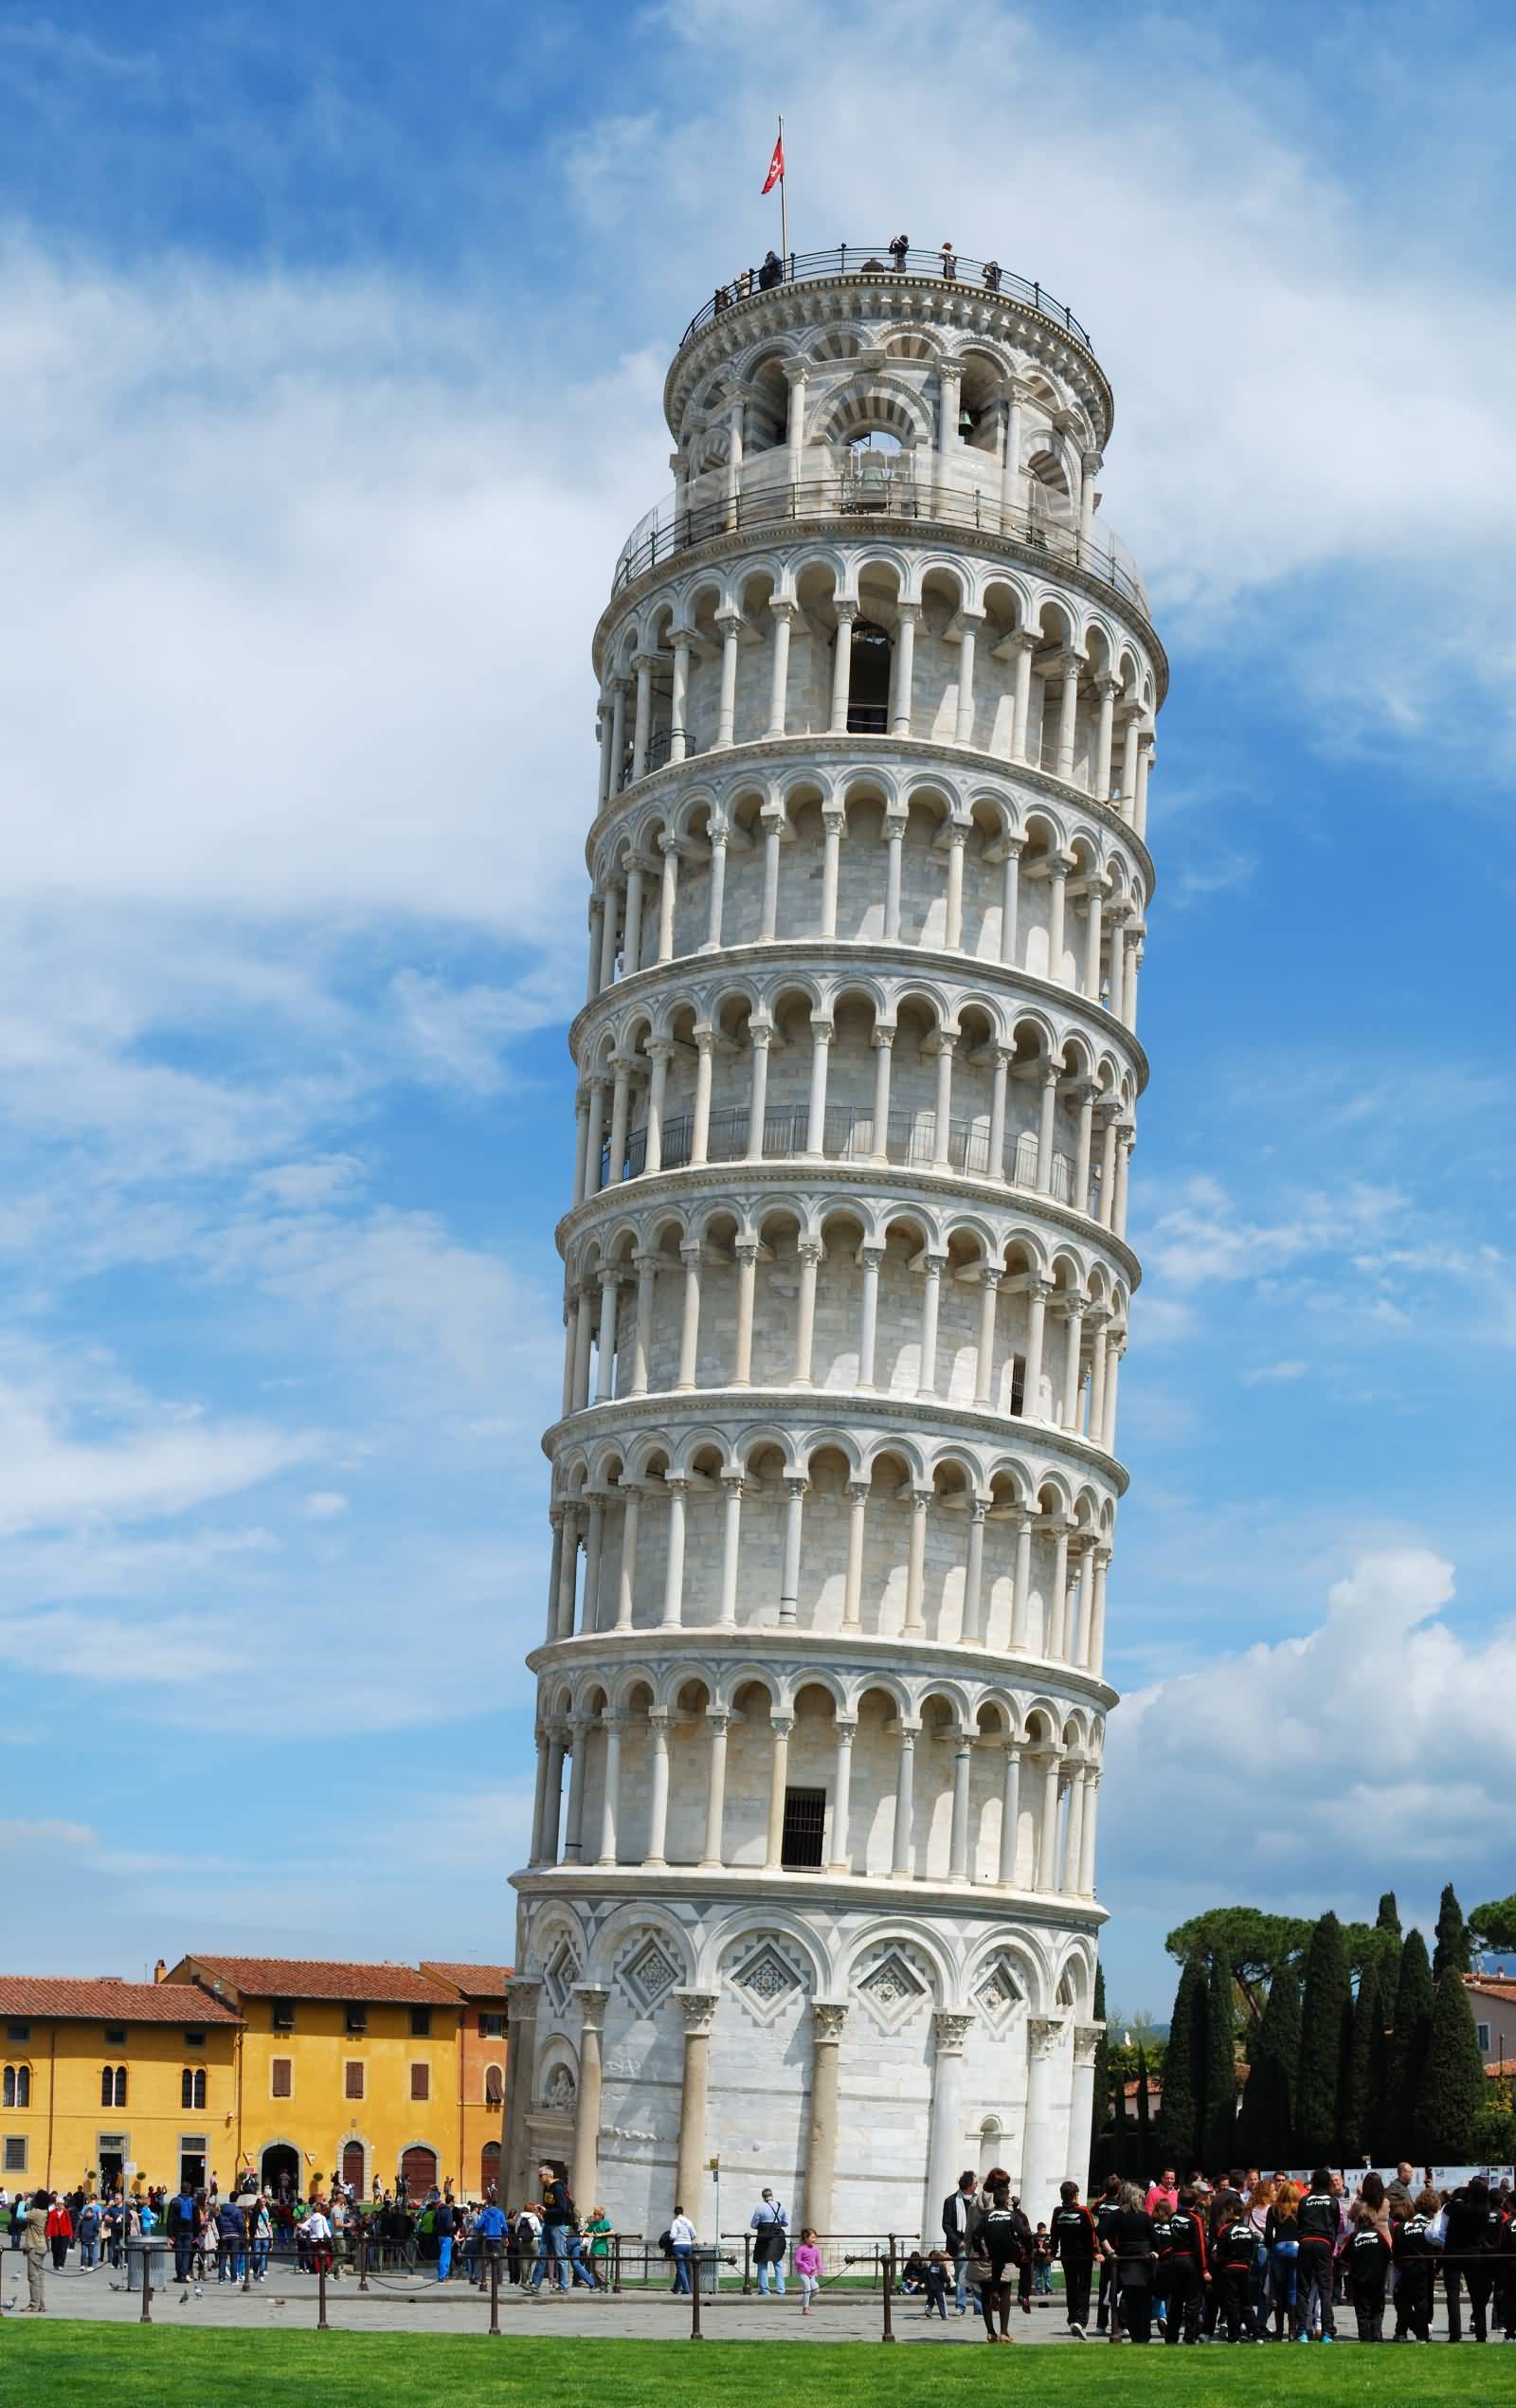 Tourists Enjoying The View Of Leaning Tower of Pisa In Italy